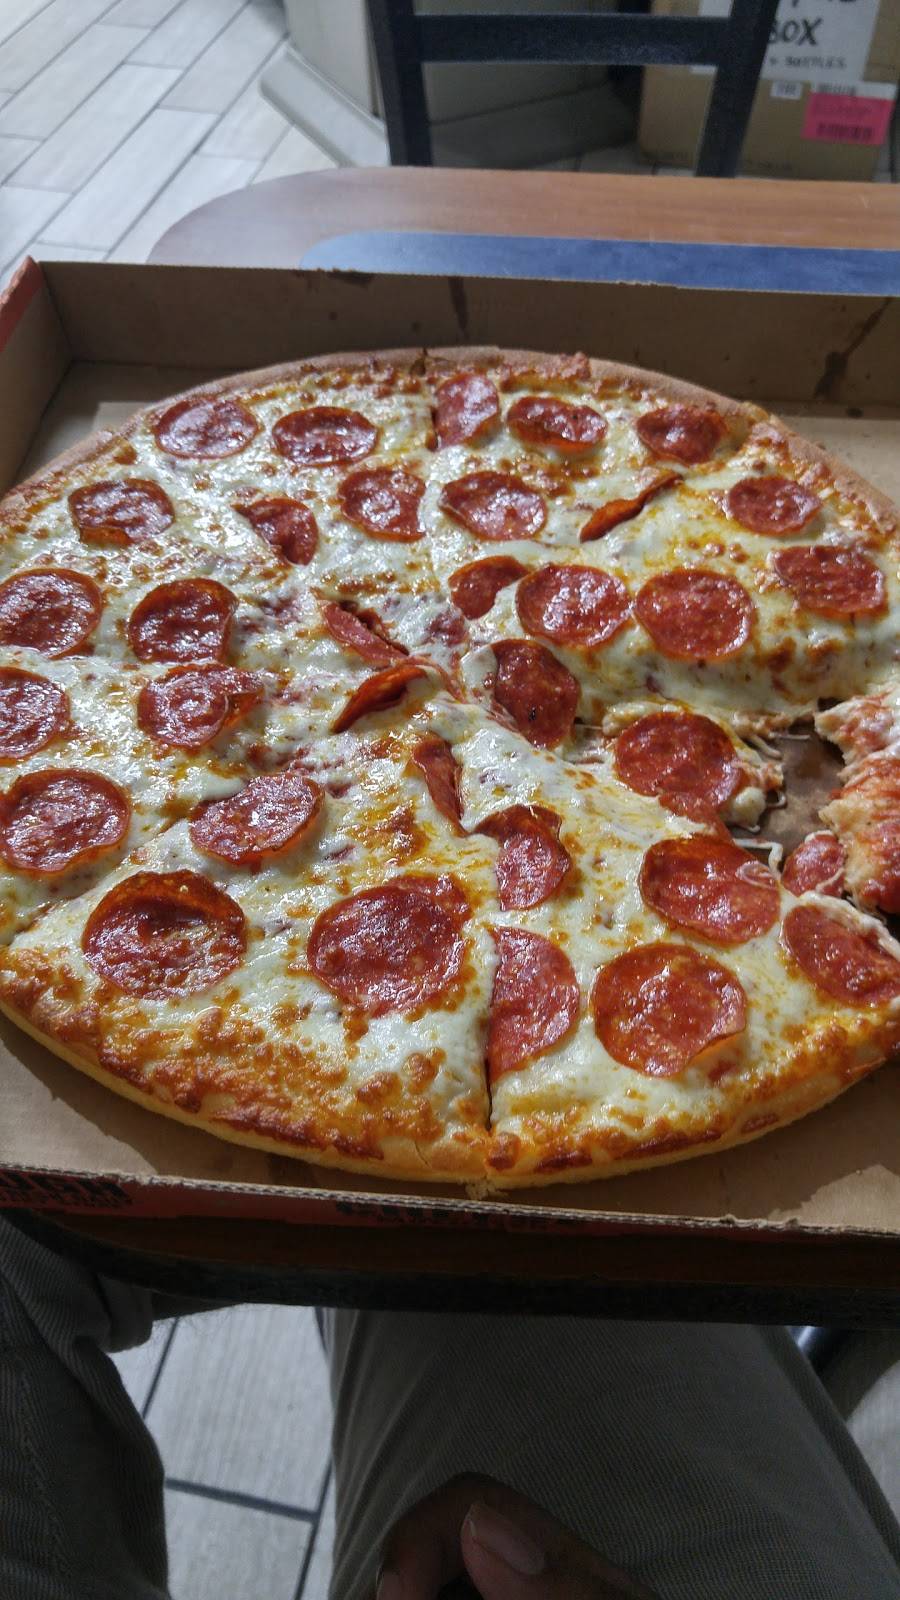 Little Caesars Pizza | meal takeaway | 57-25 Roosevelt Ave, Woodside, NY 11377, USA | 7184240005 OR +1 718-424-0005